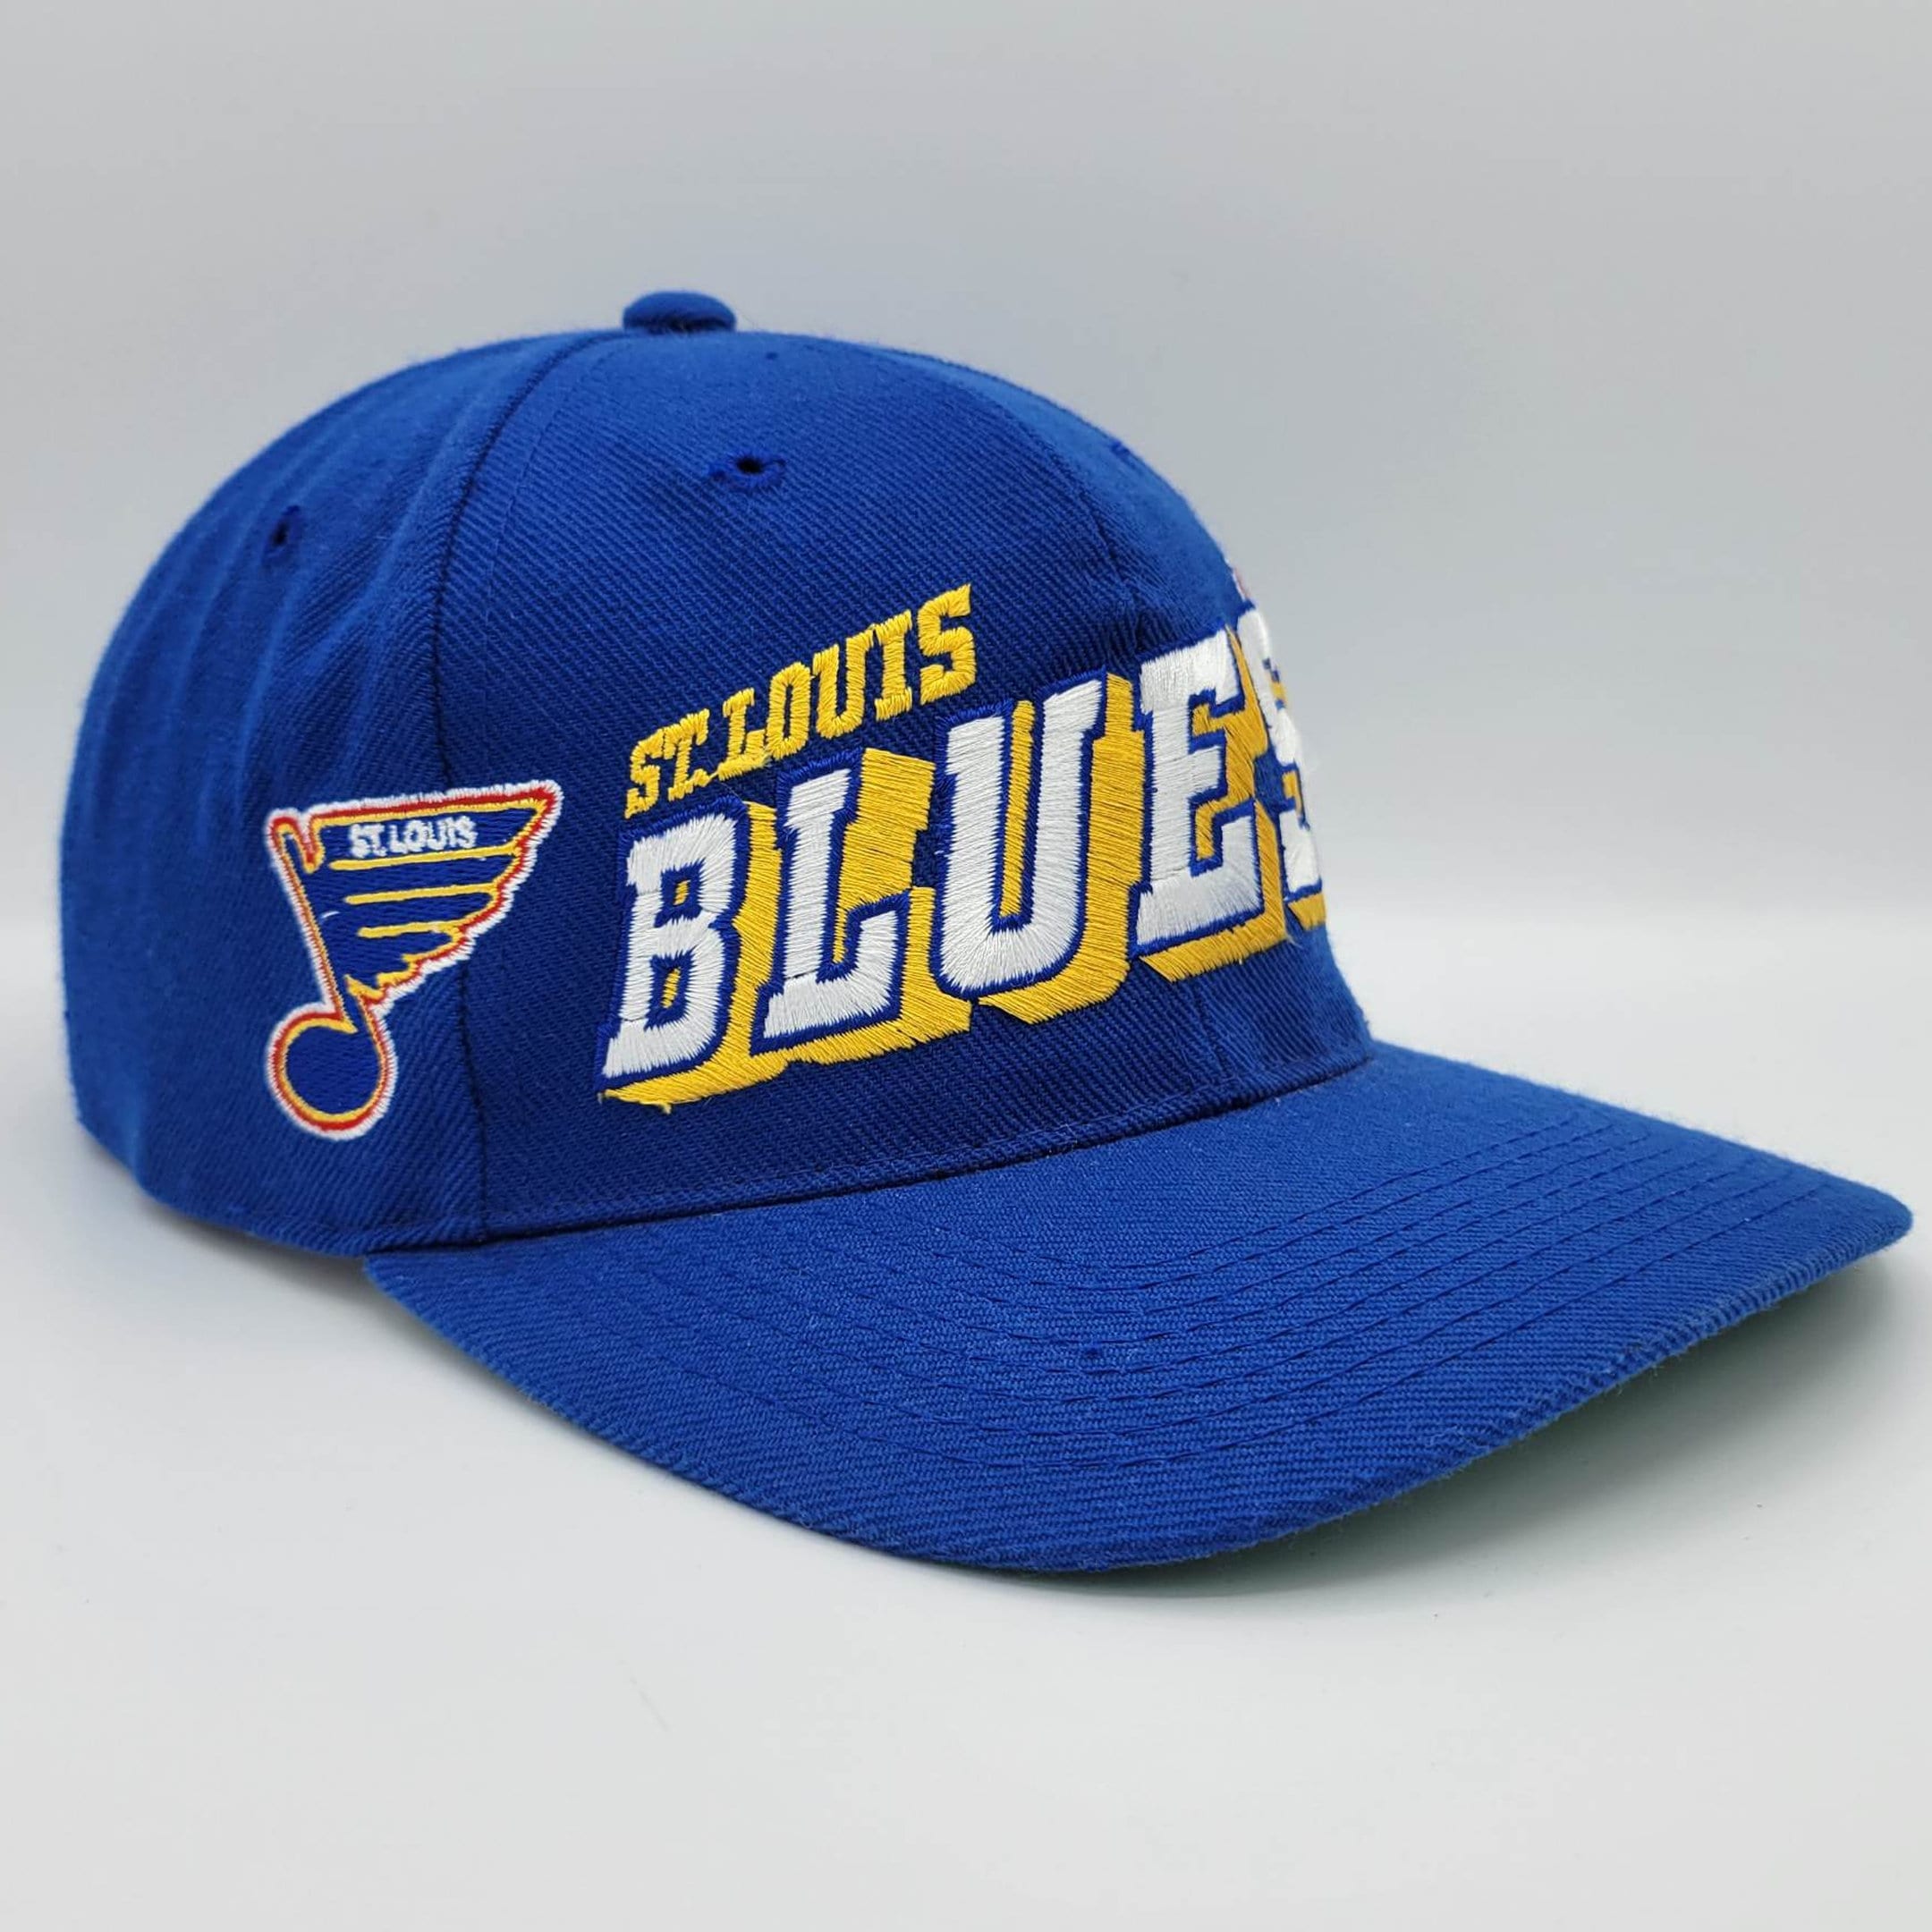 Buy 90s Blues Hat Online In India -  India